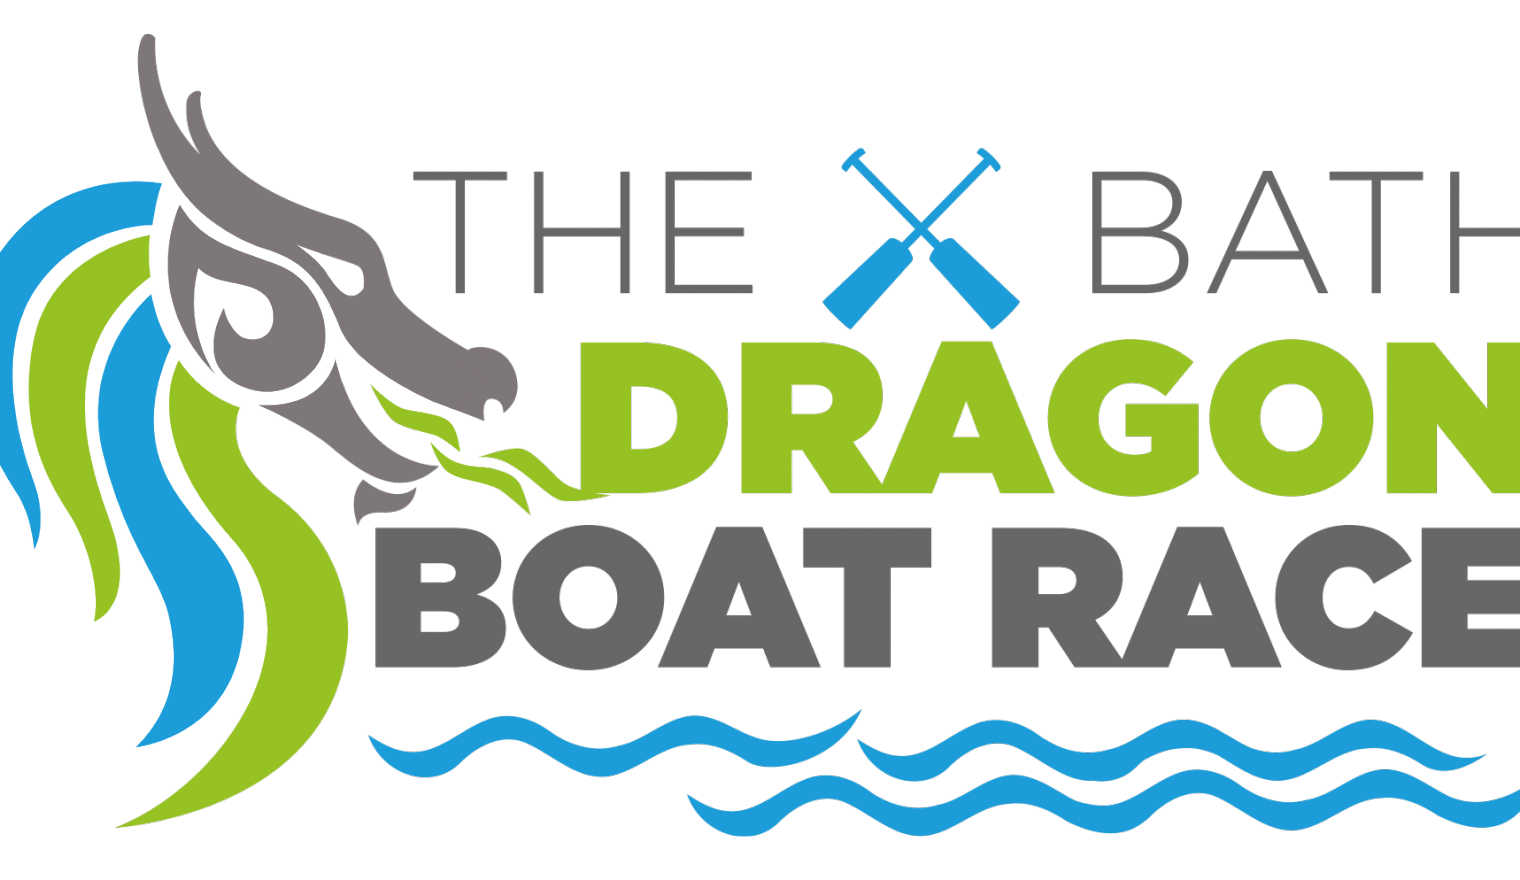 Green Boat Logo - Entries are open for the 2018 Bath Dragon Boat Race